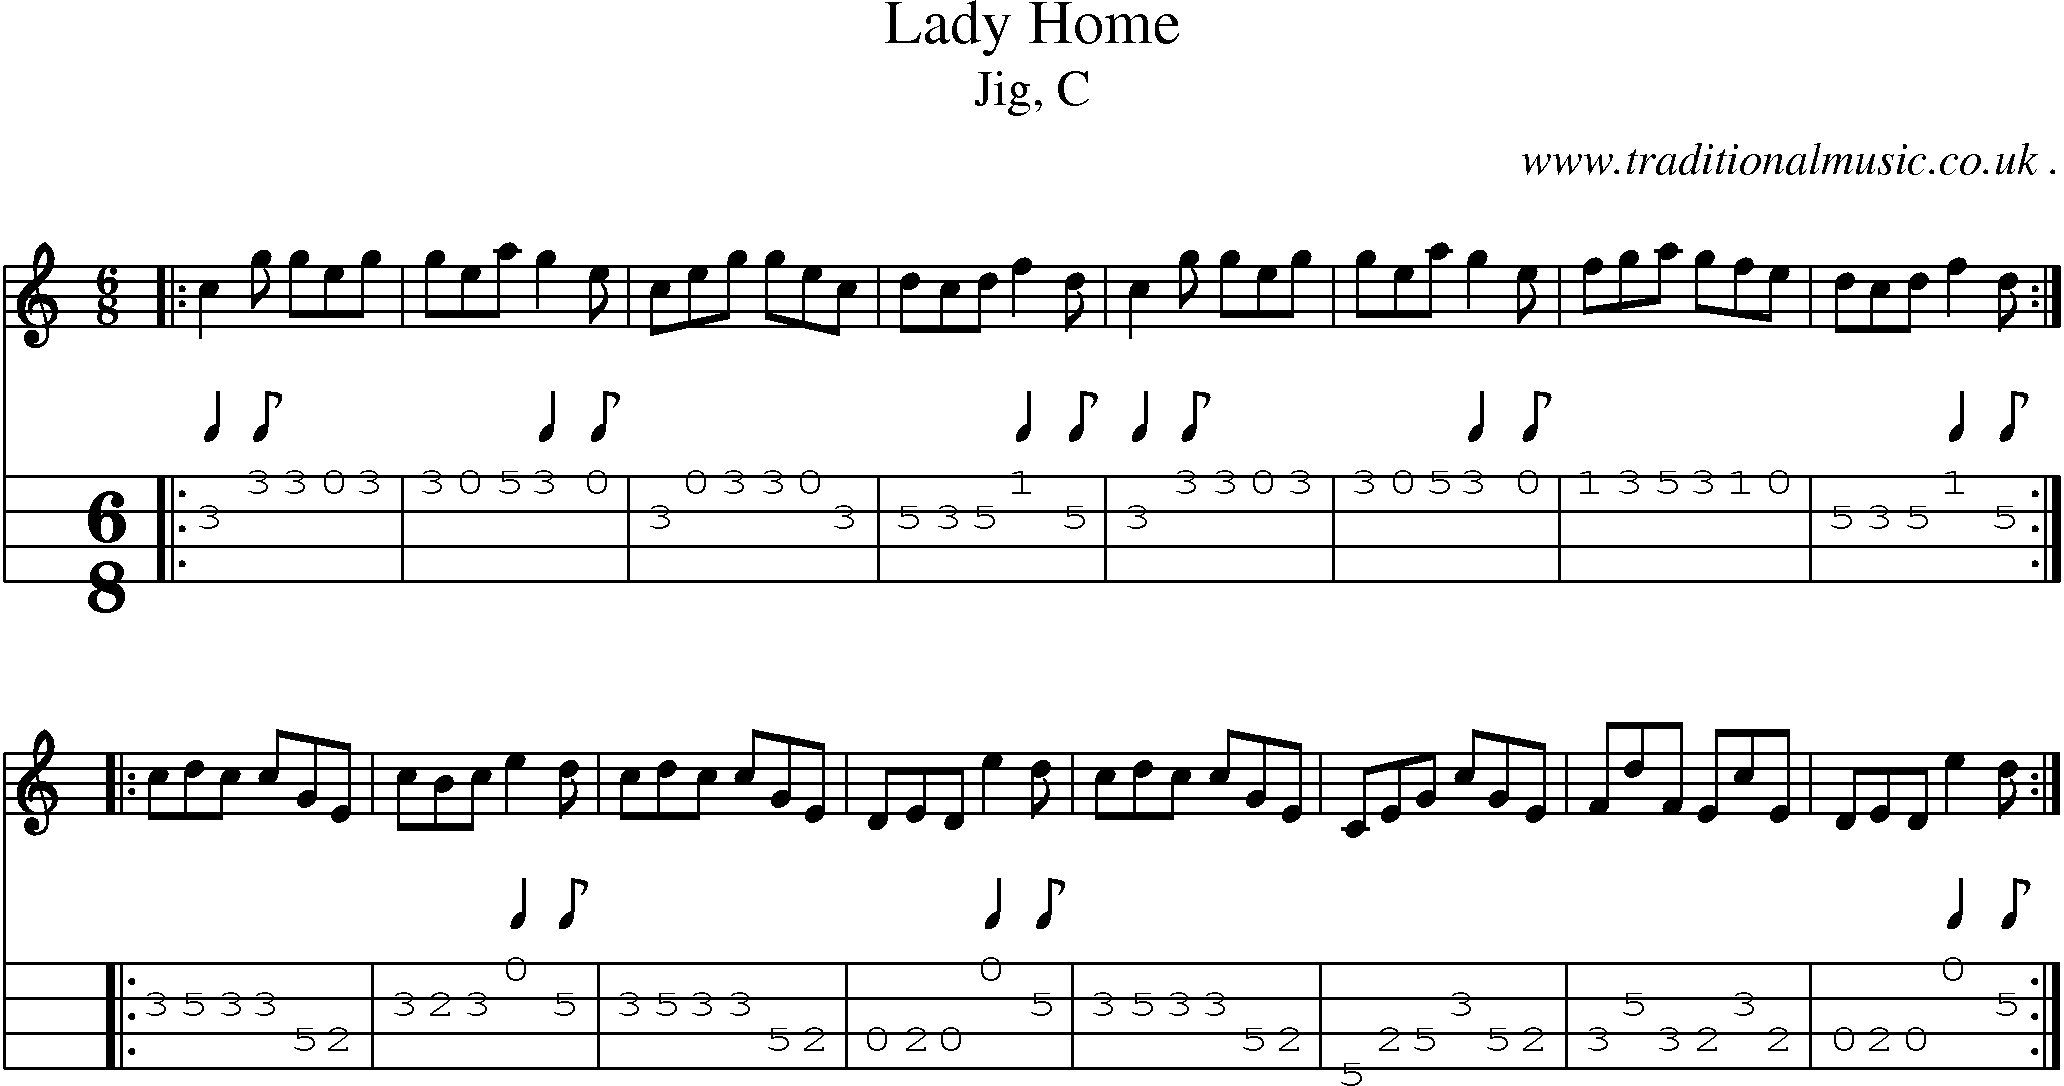 Sheet-music  score, Chords and Mandolin Tabs for Lady Home